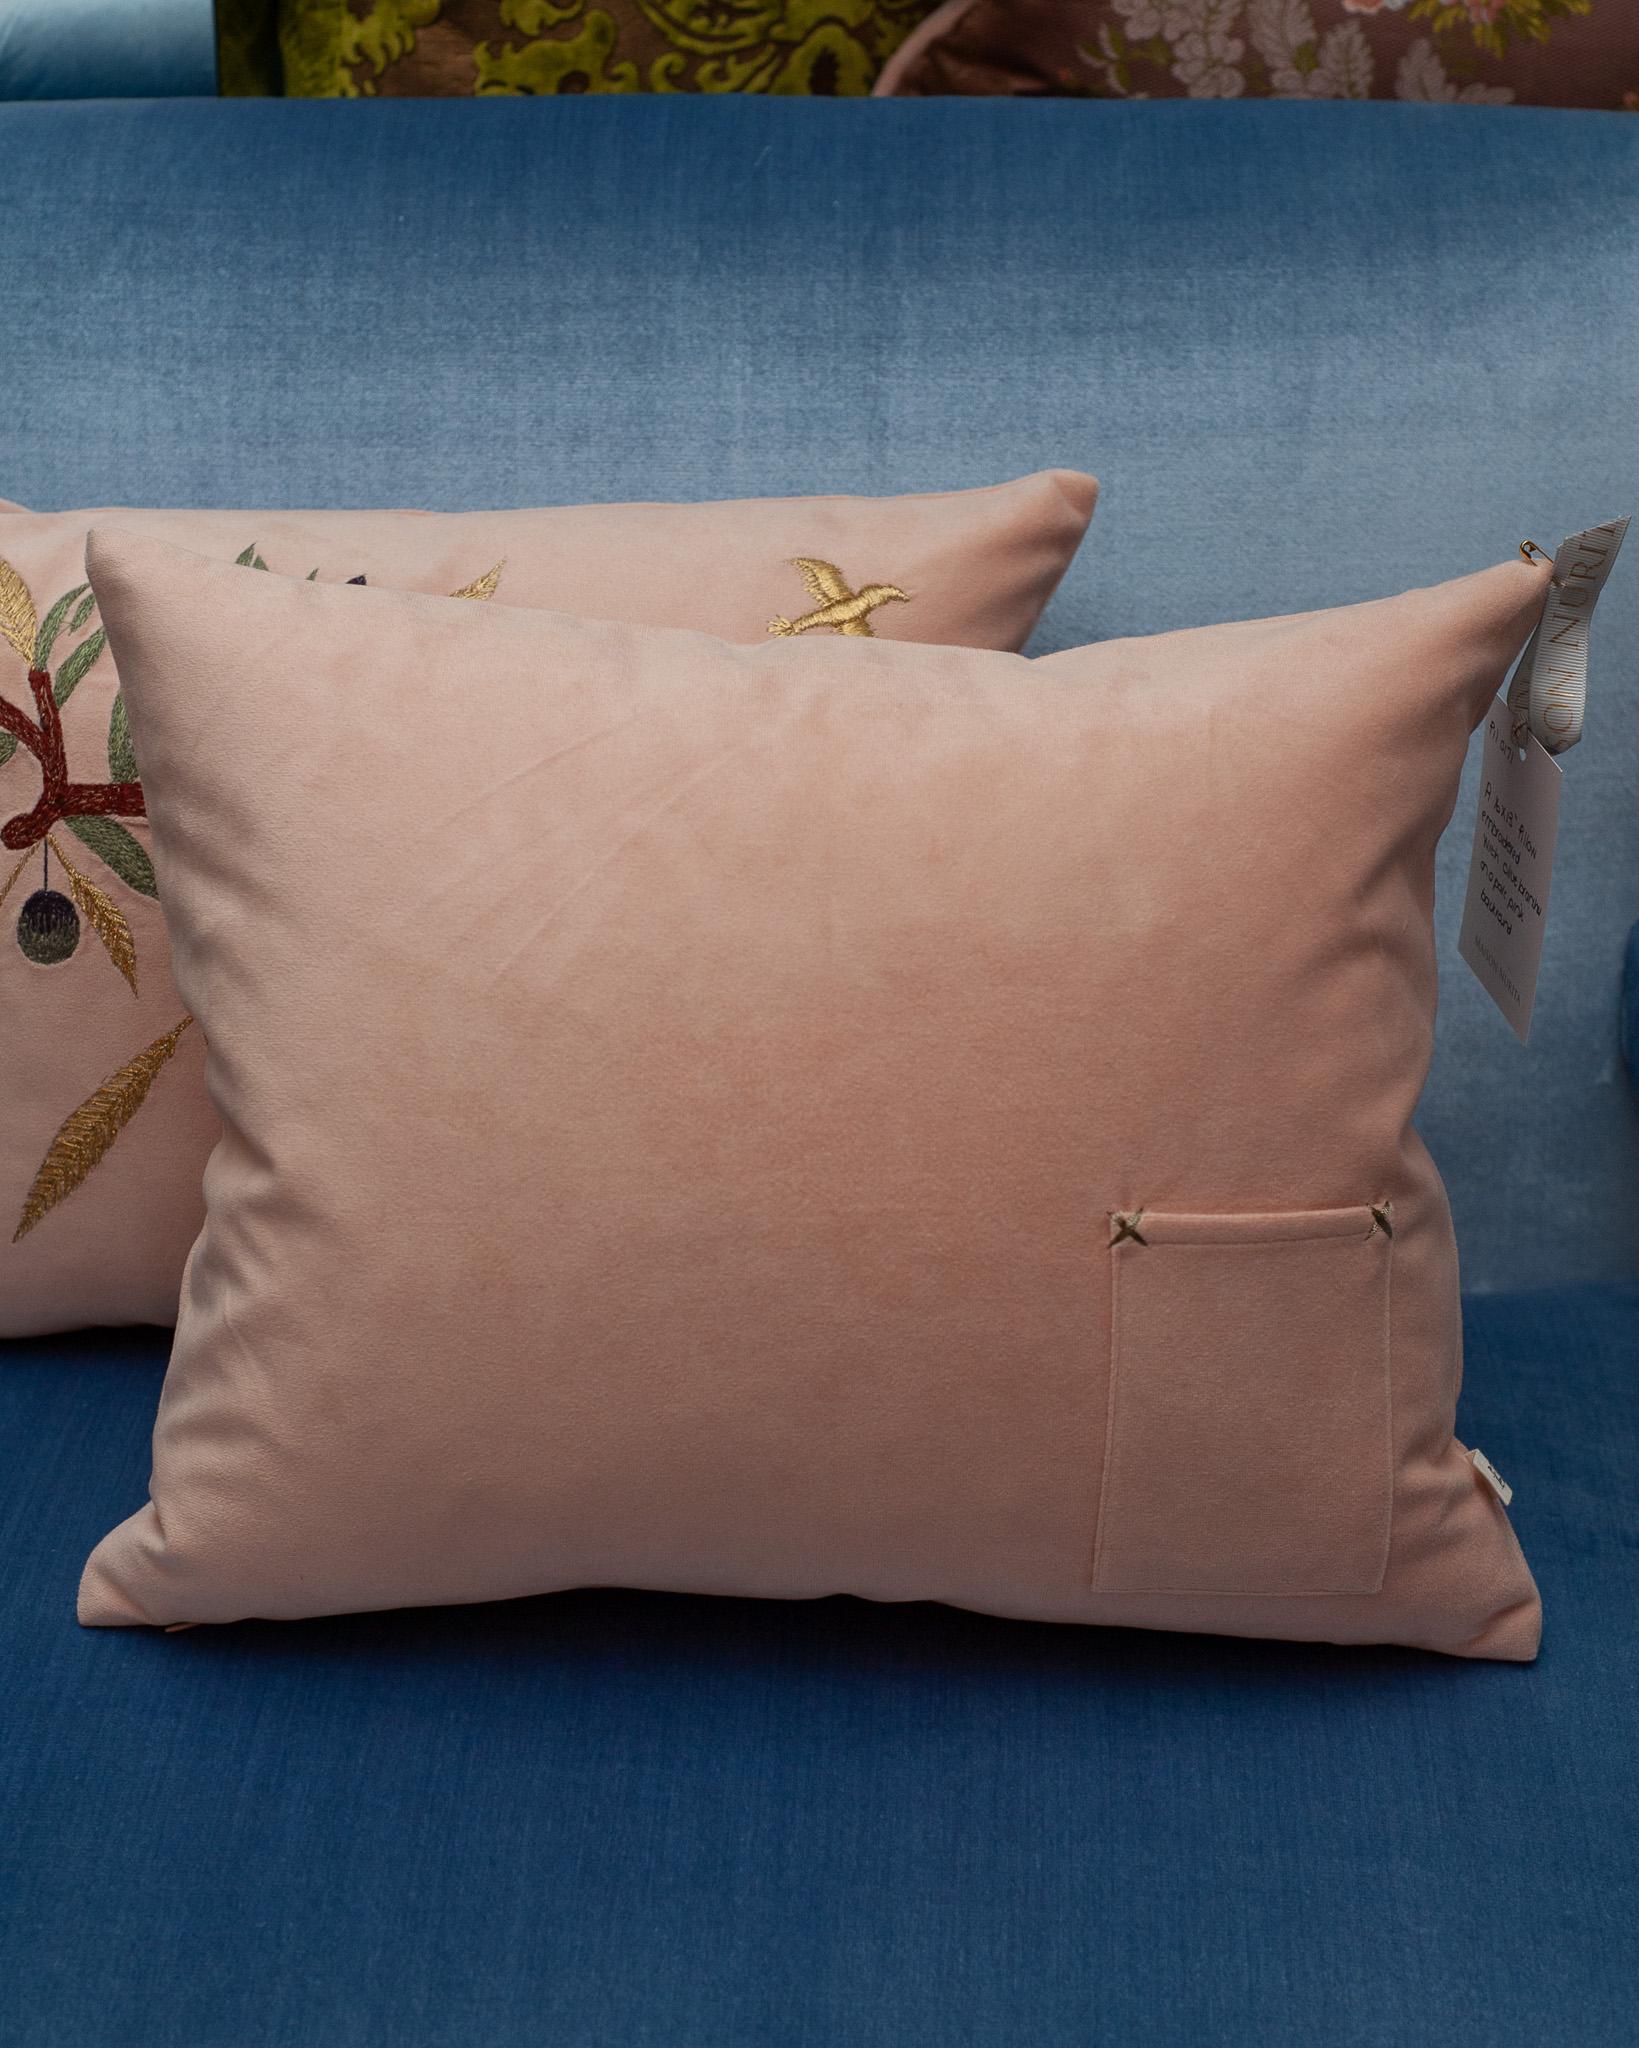 Contemporary Embroidered Pillow on Soft Pink Ultrasuede with Dove & Olive Branch For Sale 1